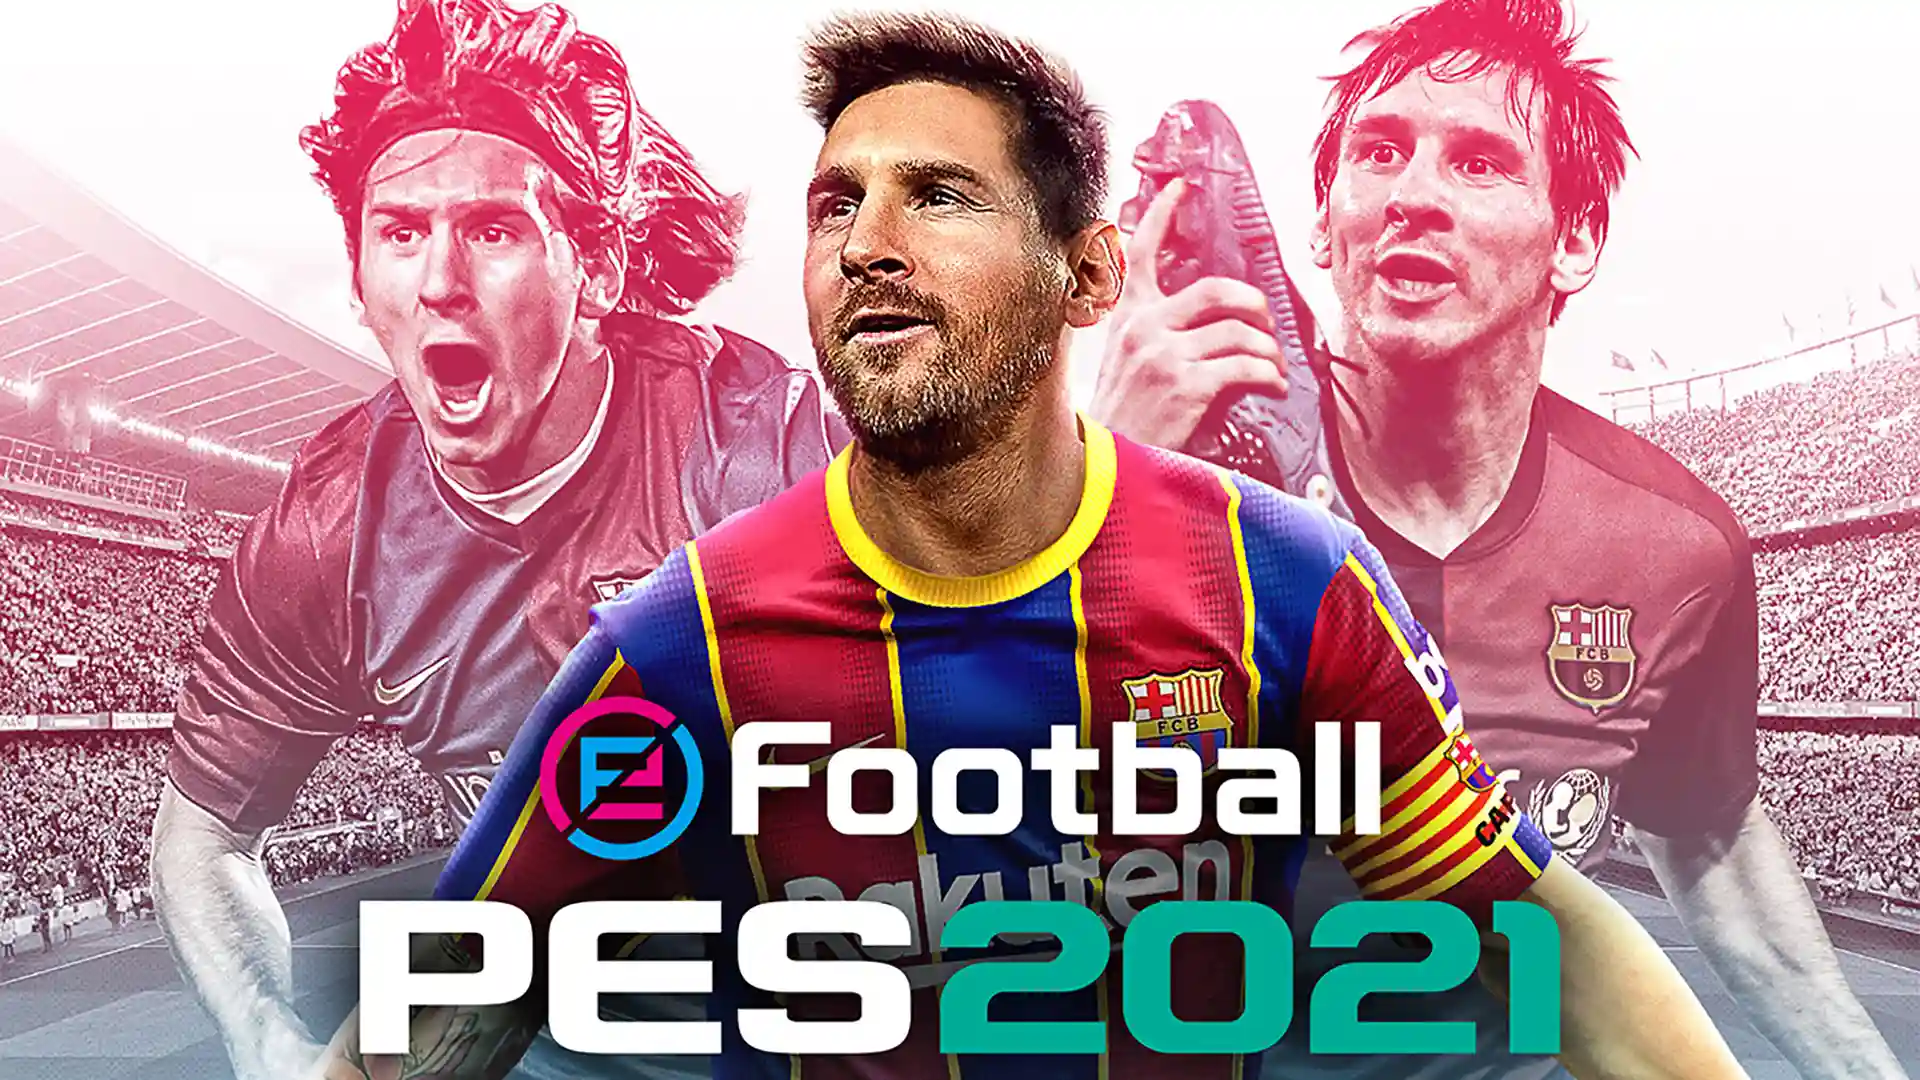 The cover of eFootBall PES 2021 is not in danger, Messi stays at Barça